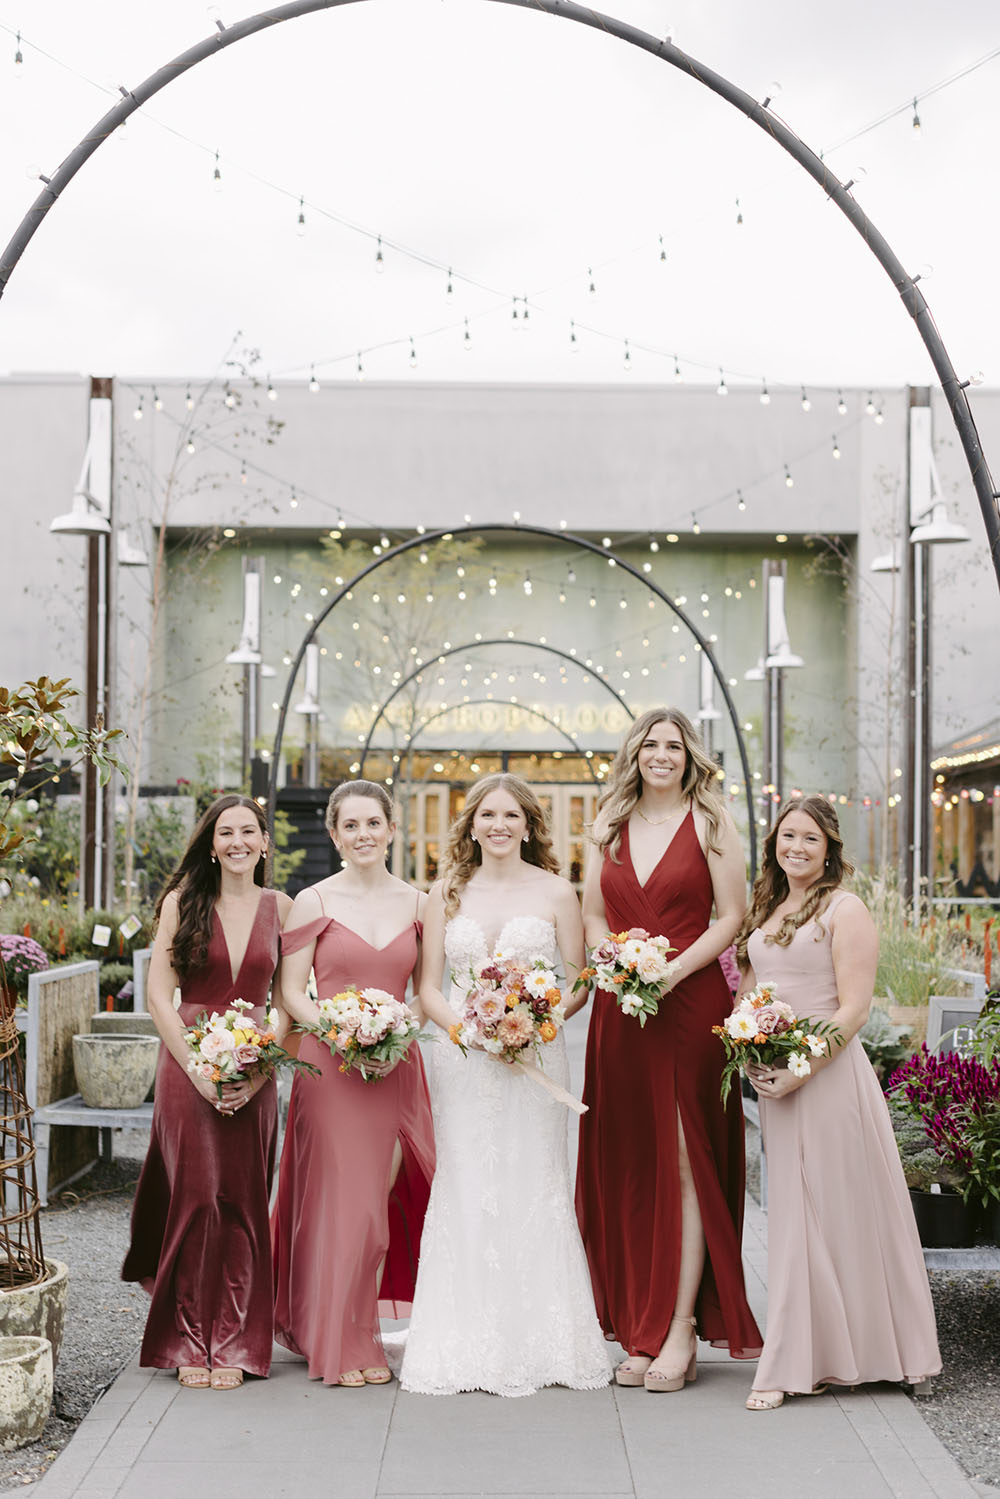 Glamorous Coral Ombre Wedding At An Iconic Garden Center ⋆ Ruffled